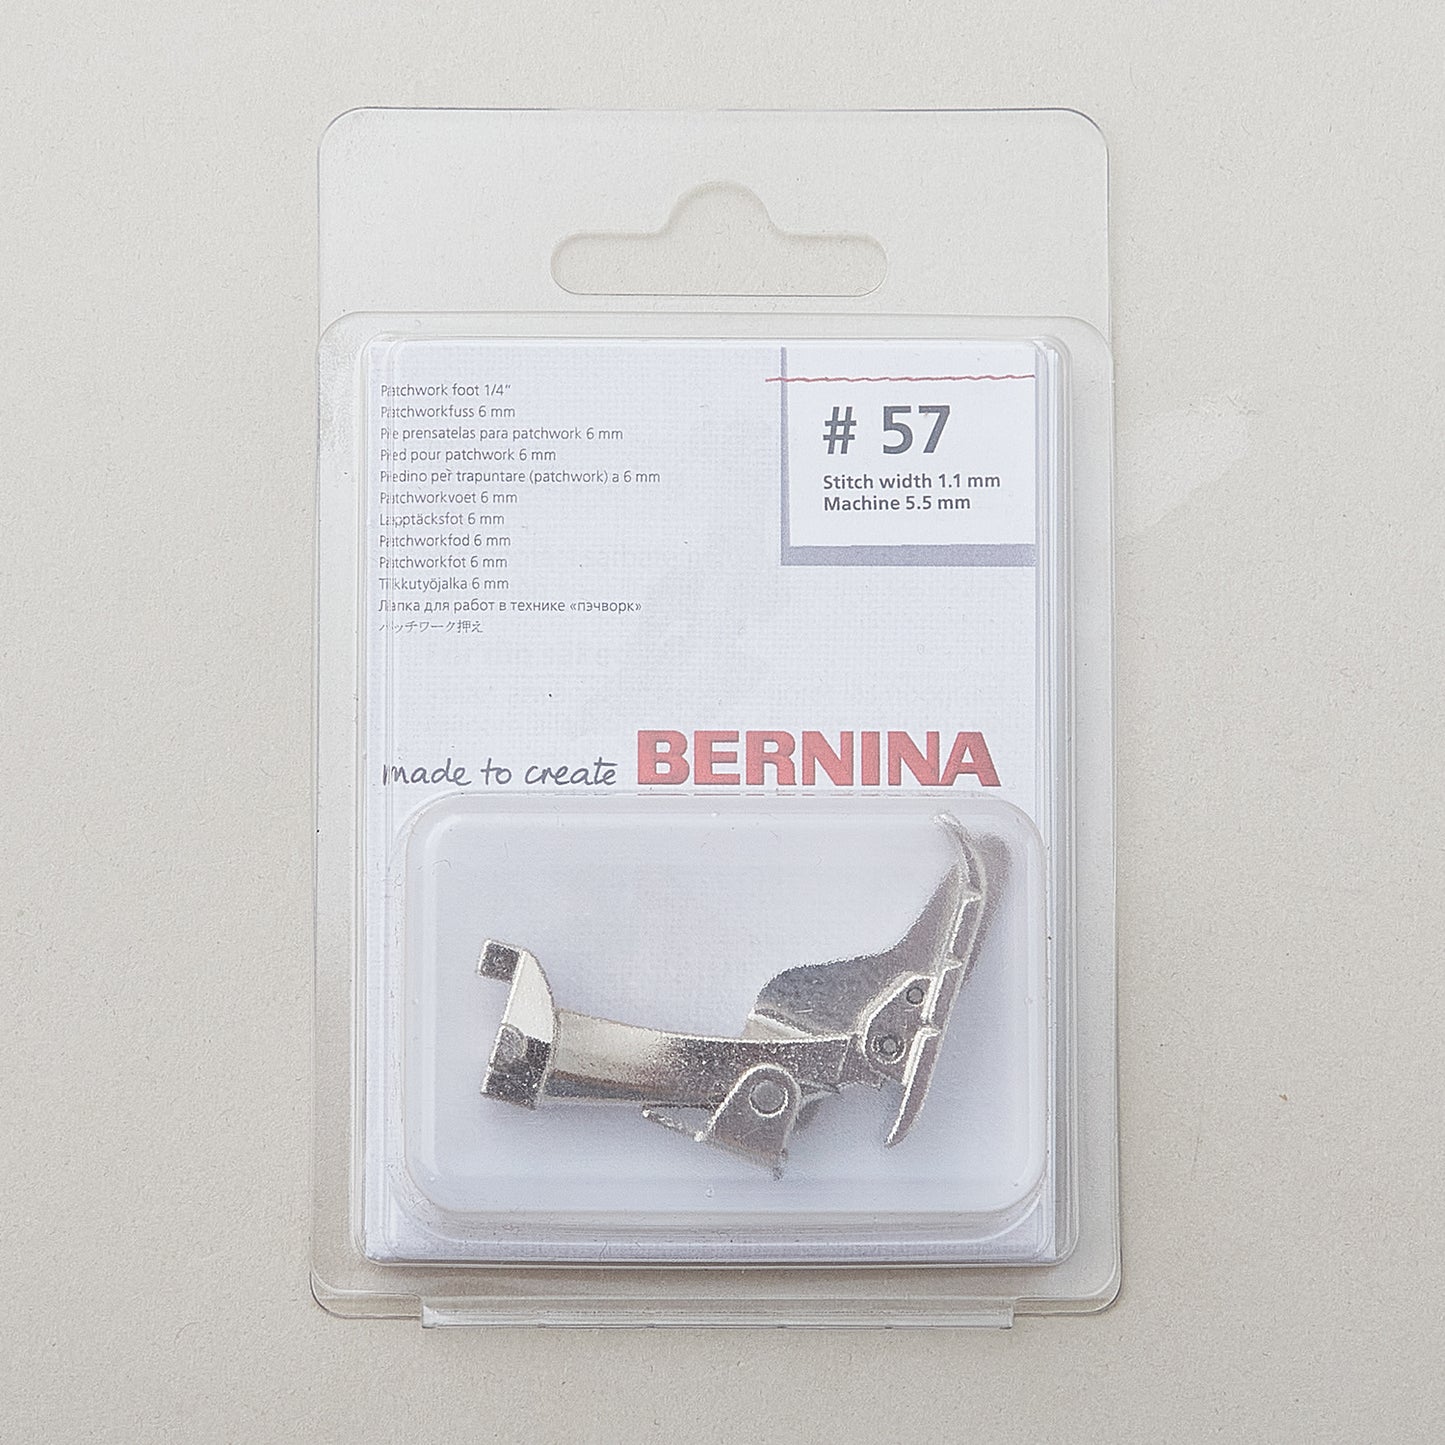 Bernina Patchwork Foot with Guide (1/4 Foot) #57 Alternative View #1